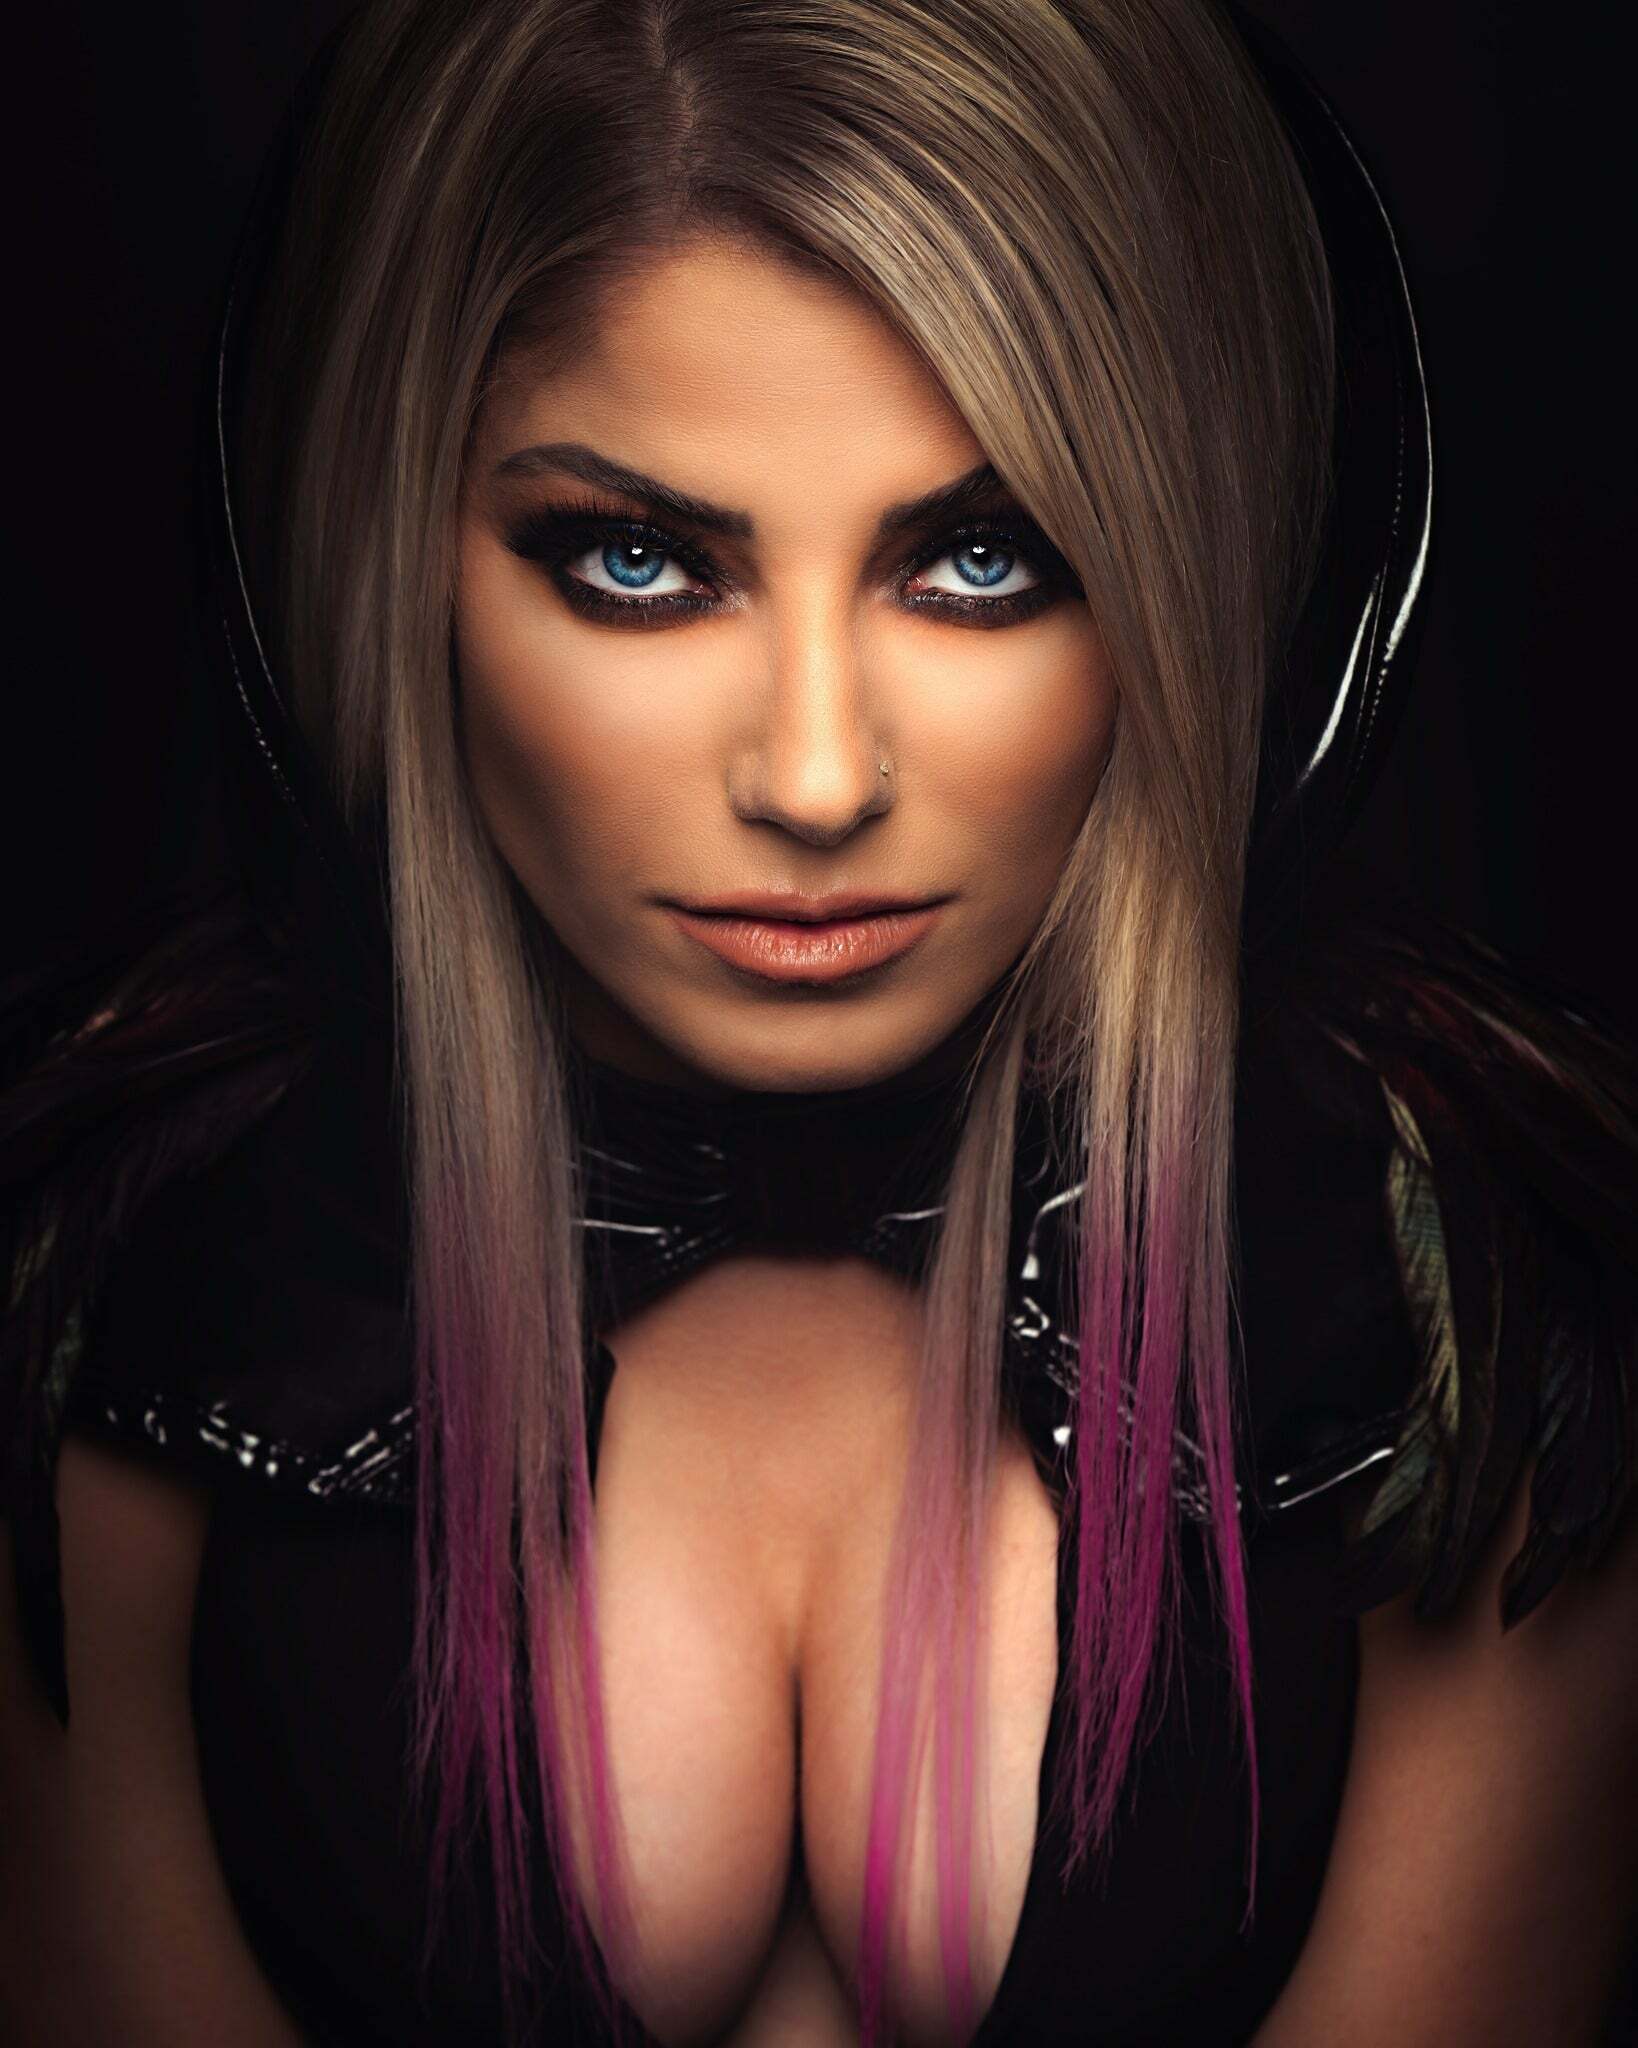 I wanna cum in Alexa Bliss mouth and watch it